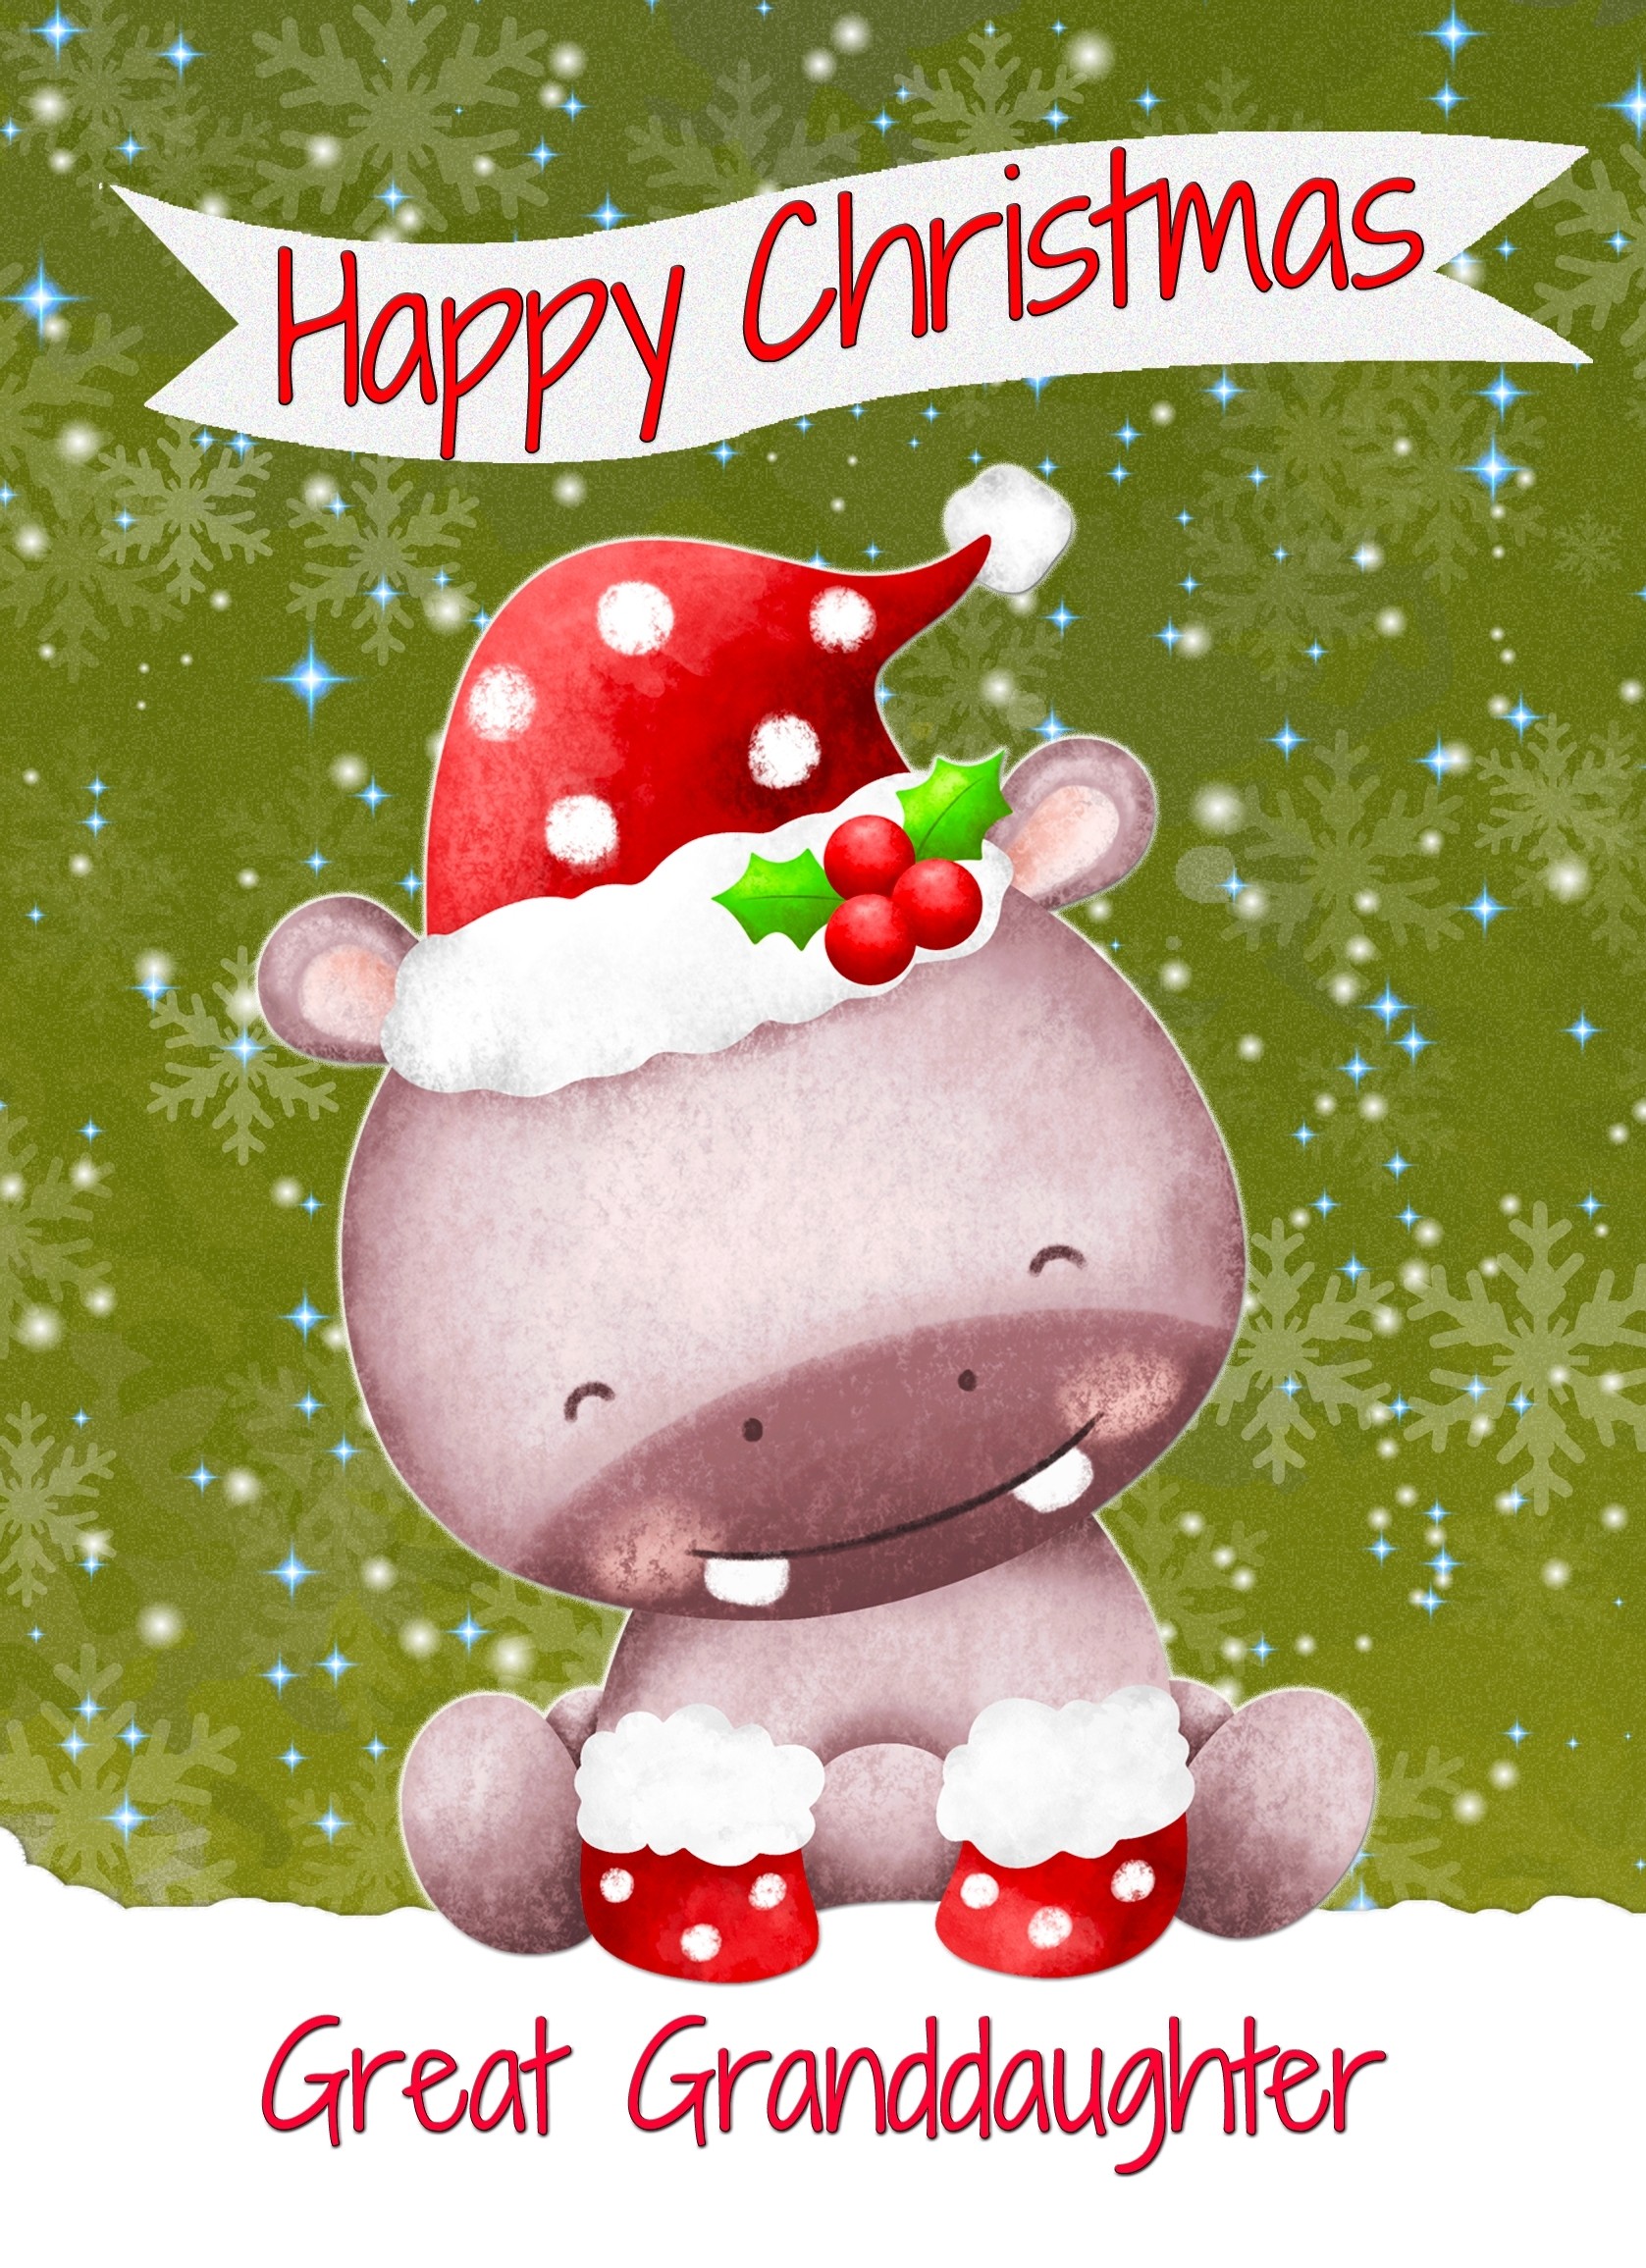 Christmas Card For Great Granddaughter (Happy Christmas, Hippo)